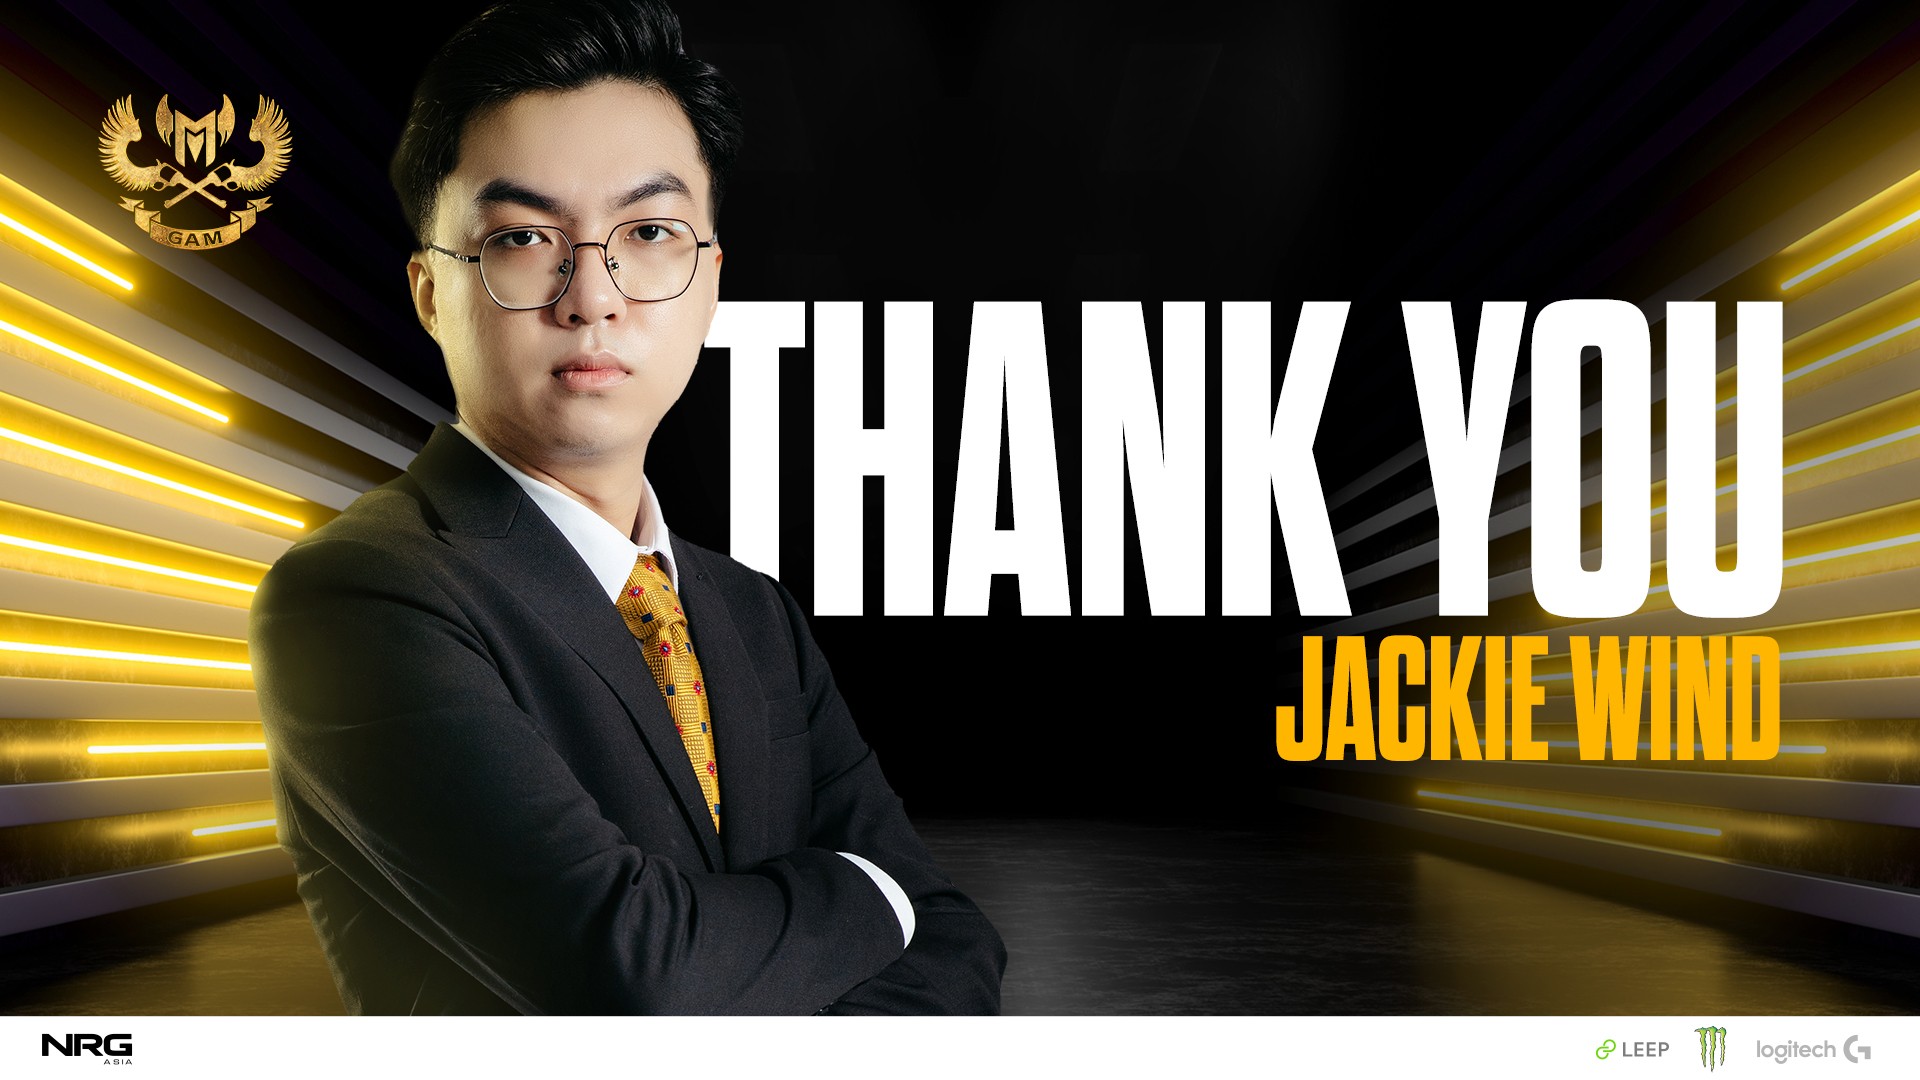 thank-you-jackiewind-poster-1670026959.jpg